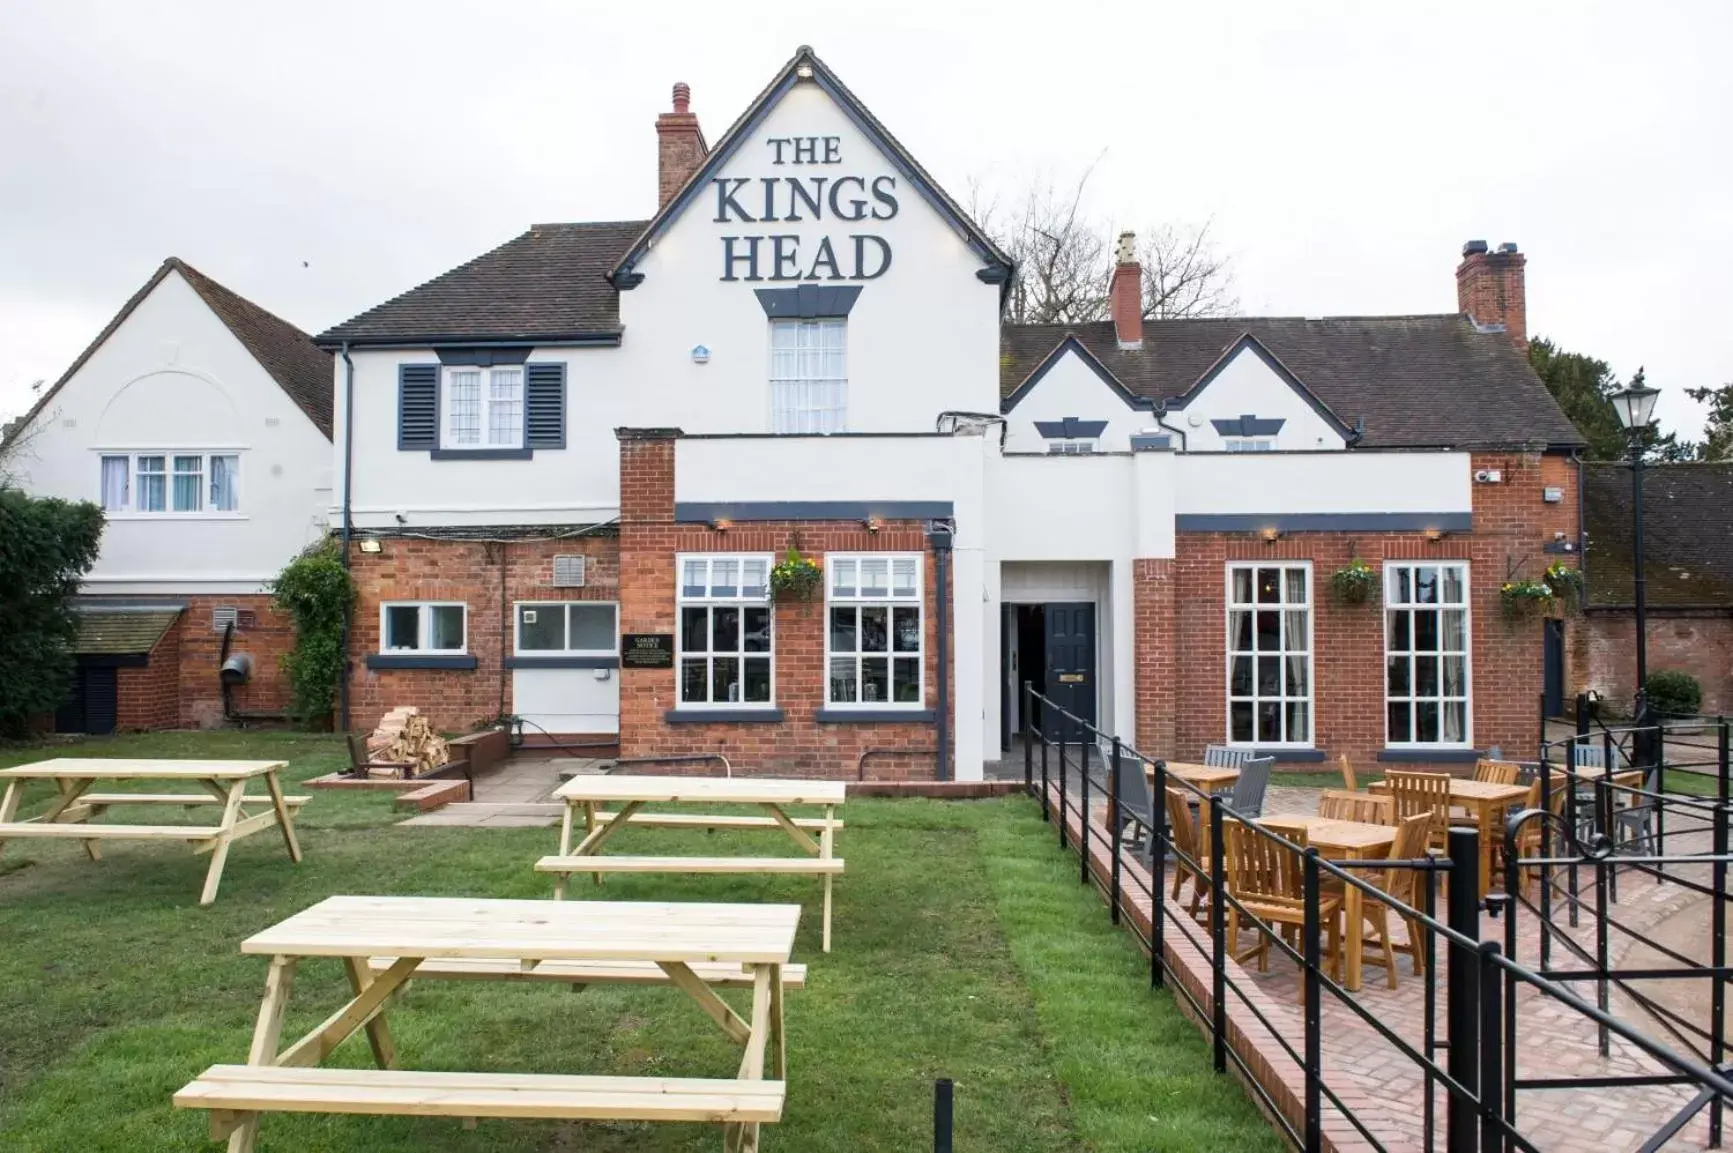 Property building in The King's Head by Innkeeper's Collection